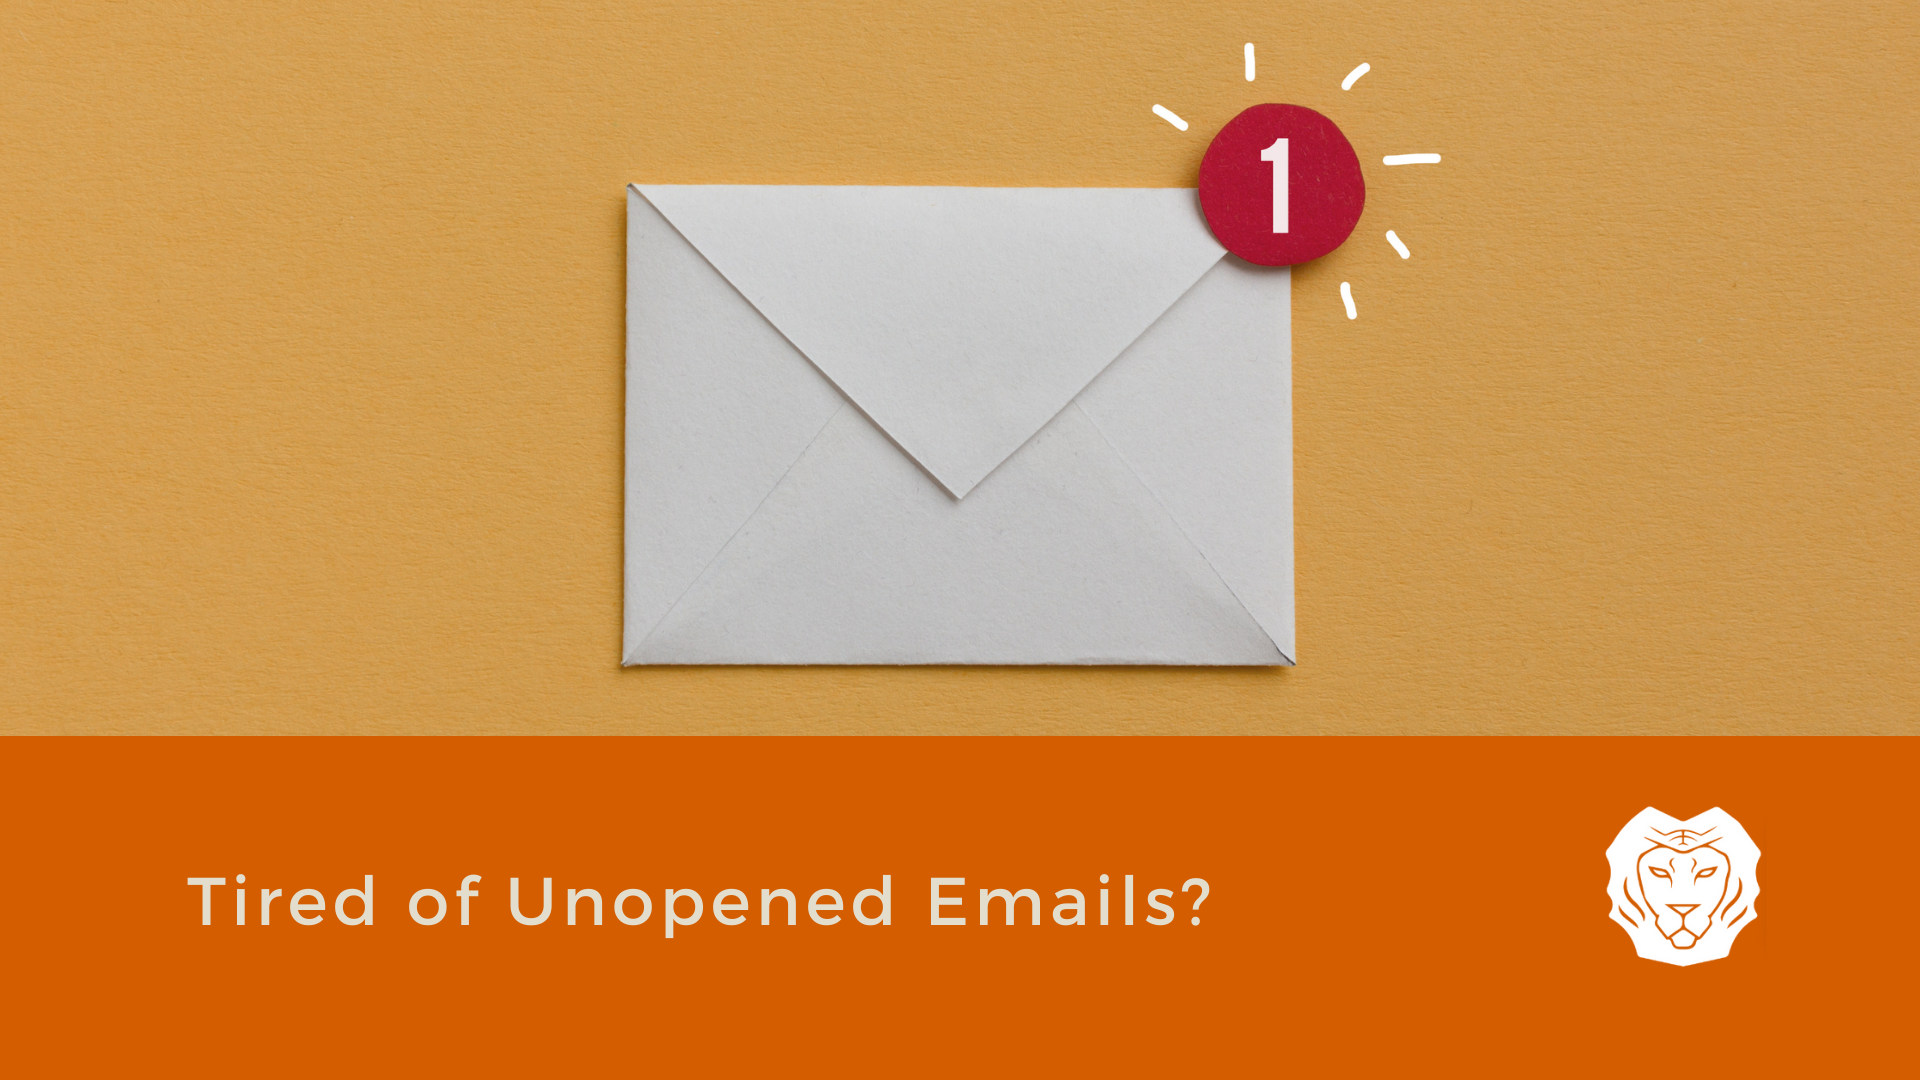 Tired of Unopened Emails?